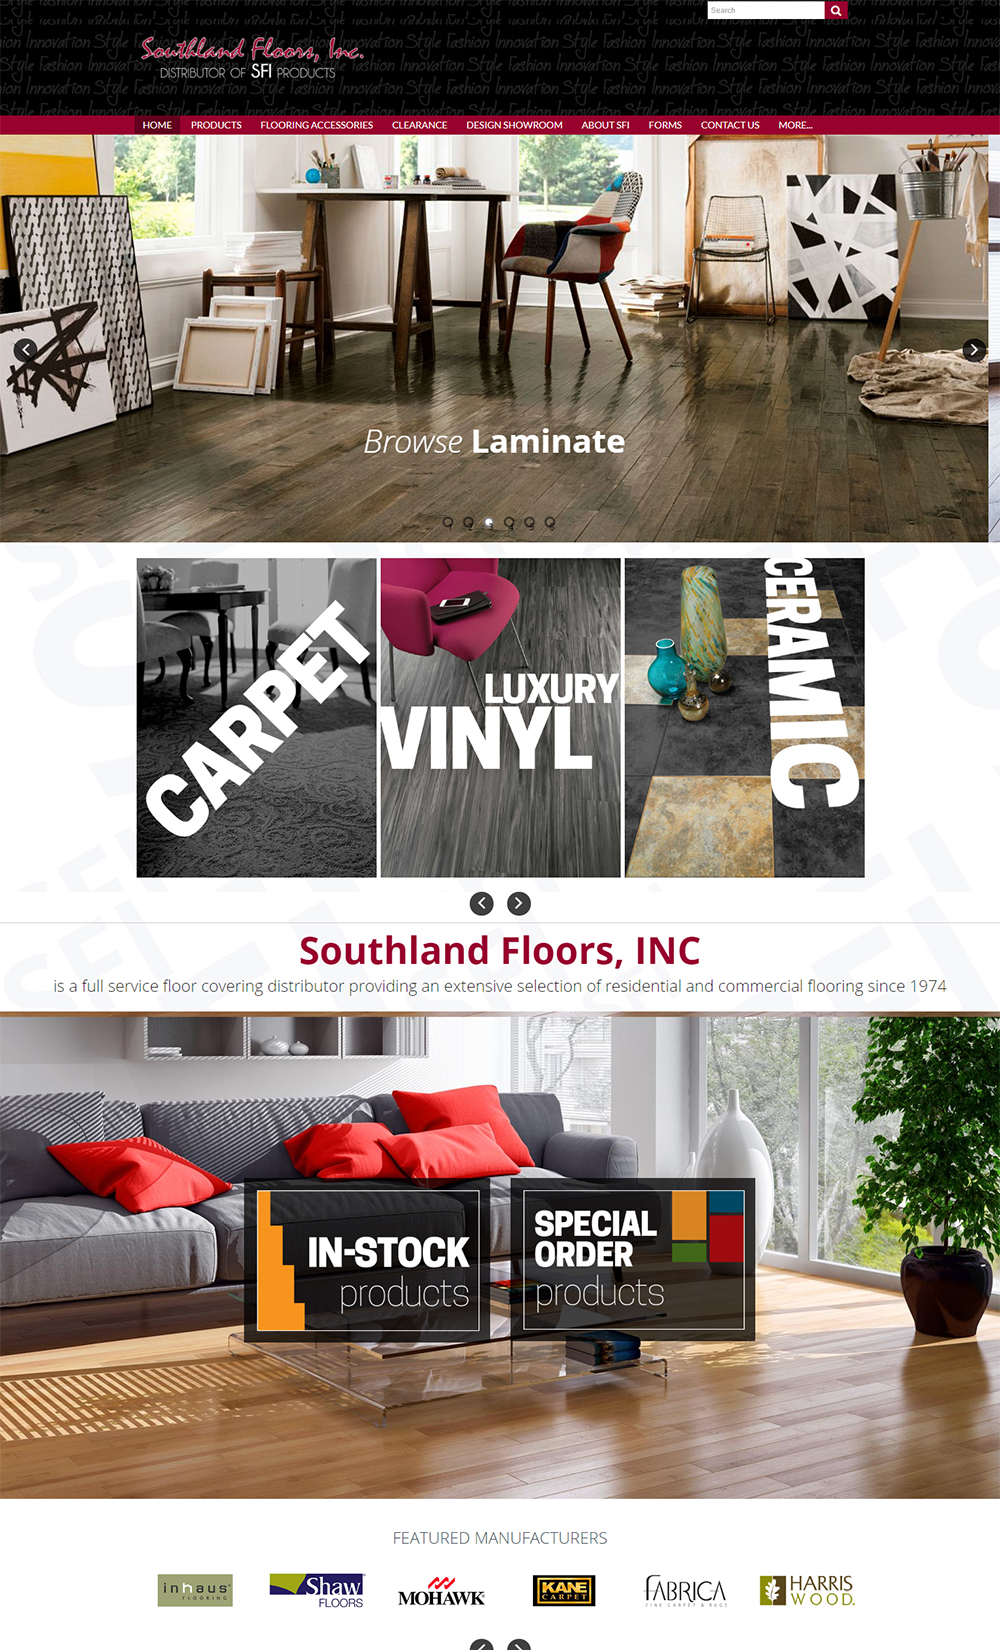 Southland Floors